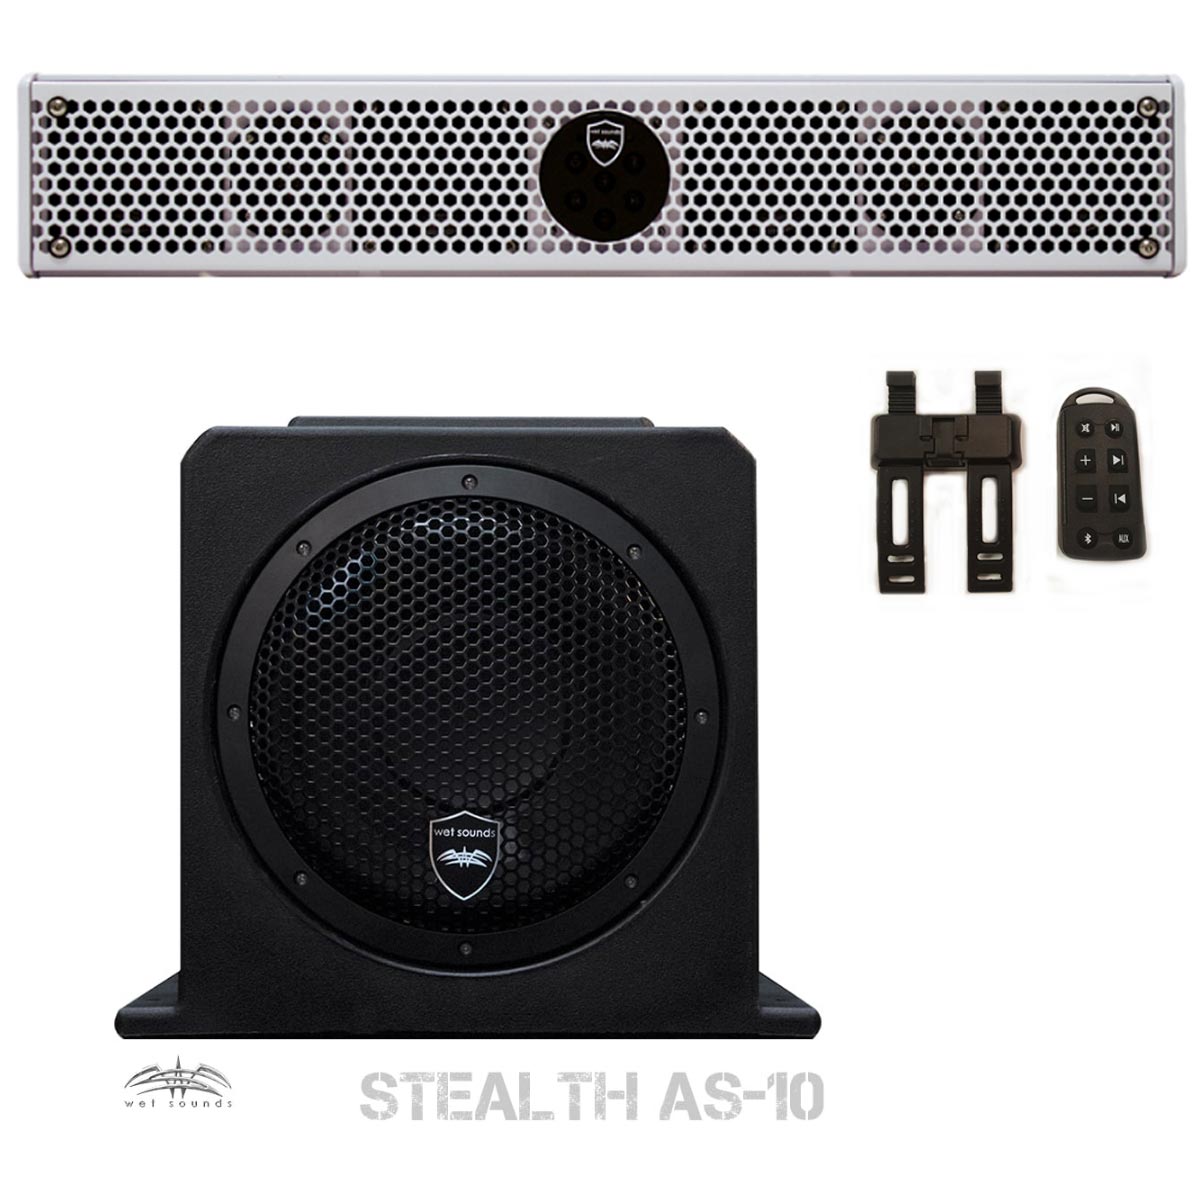 Wet Sounds Package - White Stealth 6 Ultra HD Sound Bar w/ Remote and AS-10 10" 500 Watt Powered Stealth Subwoofer - image 1 of 7